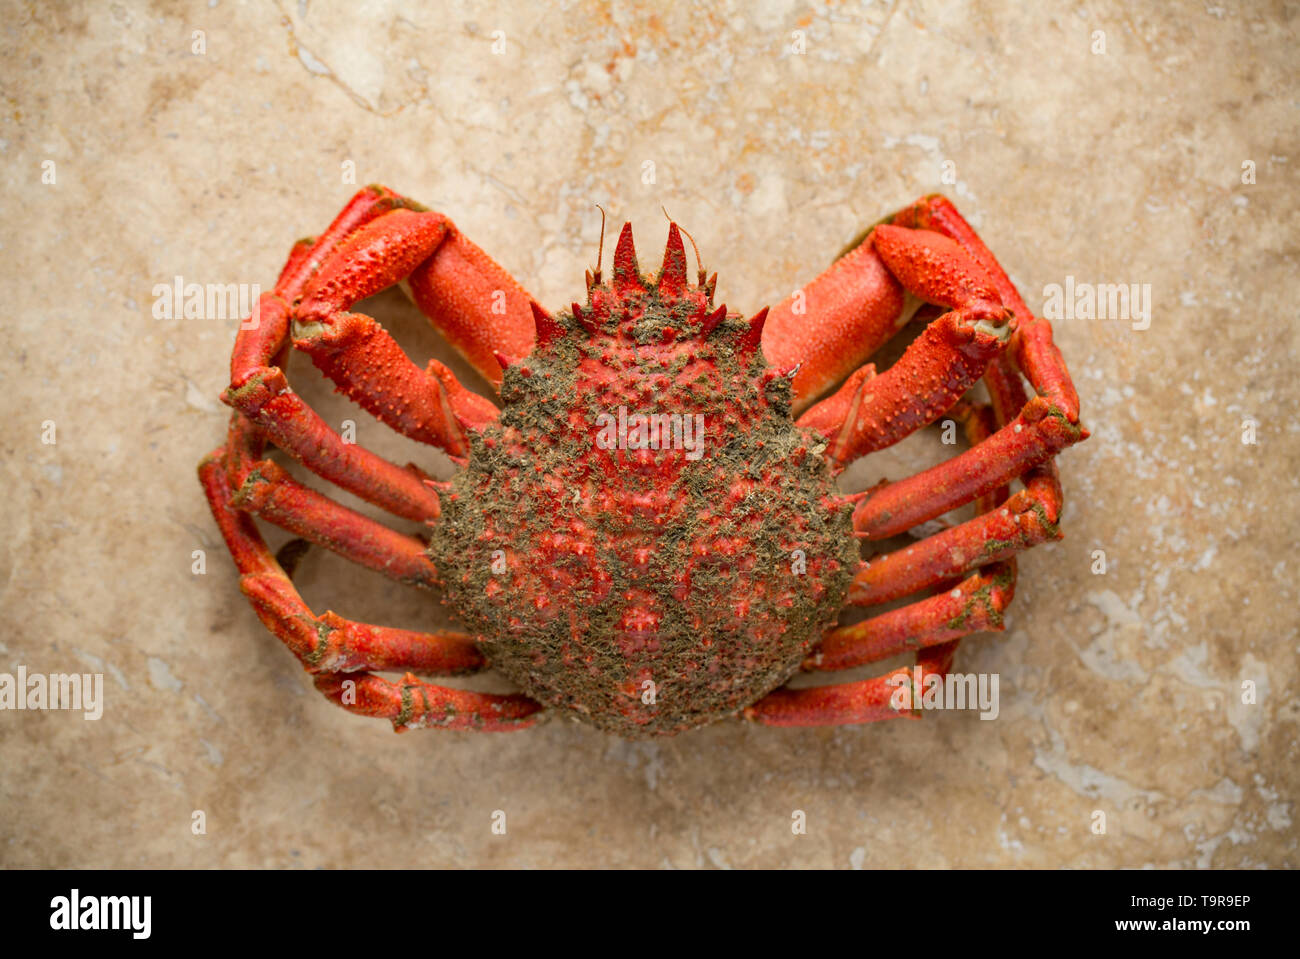 A boiled, cooked European spider crab, Maja brachydactyla, that was caught from a pier in the UK in a baited drop net. It has been boiled and is ready Stock Photo